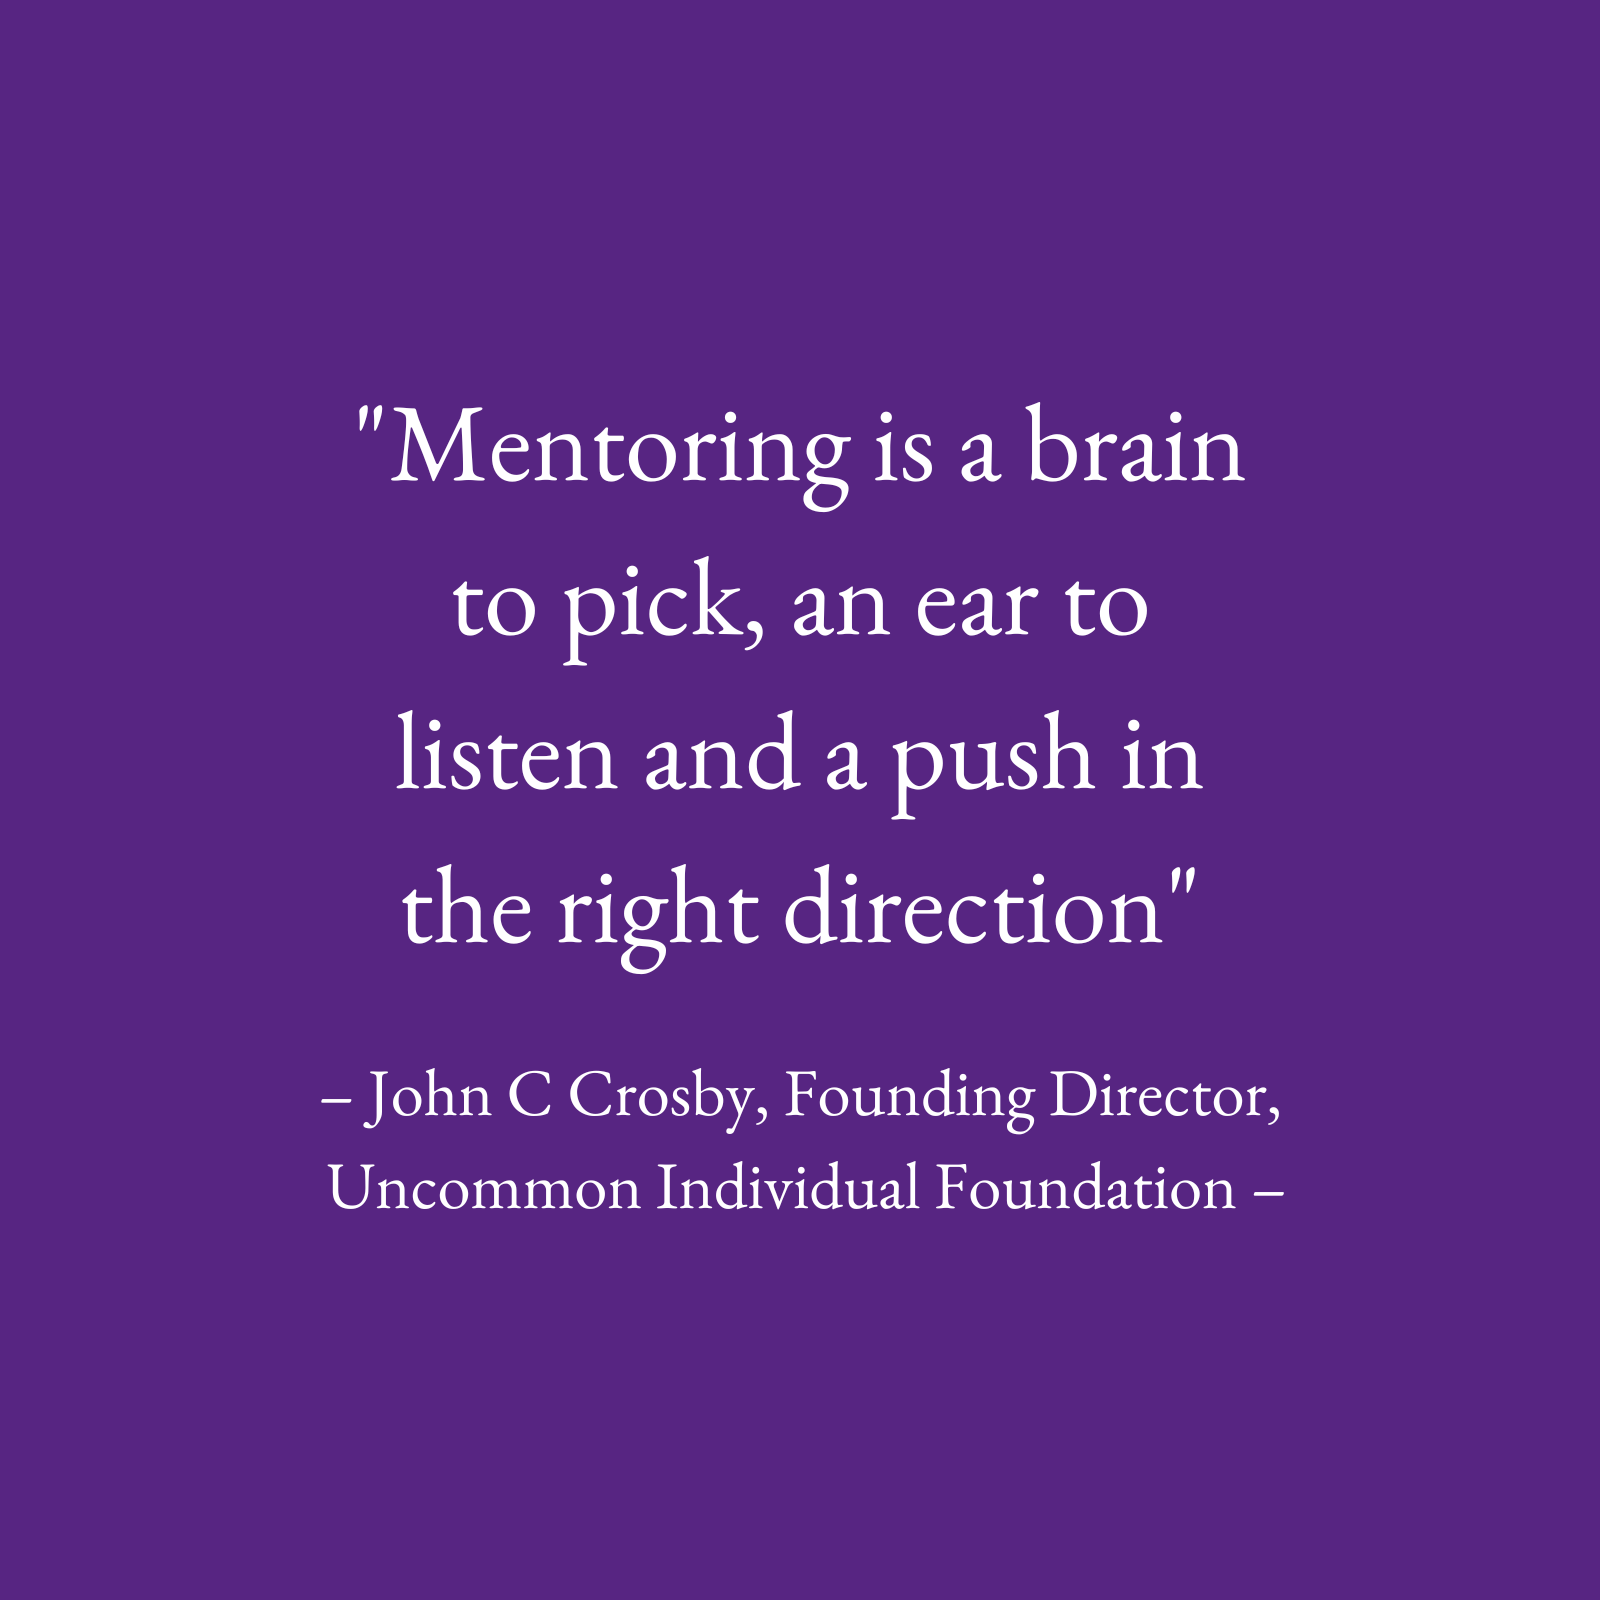 Image - text only - "Mentoring is a brain to pick, an ear to listen and a push in the right direction" – John C Crosby, Founding Director, Uncommon Individual Foundation –